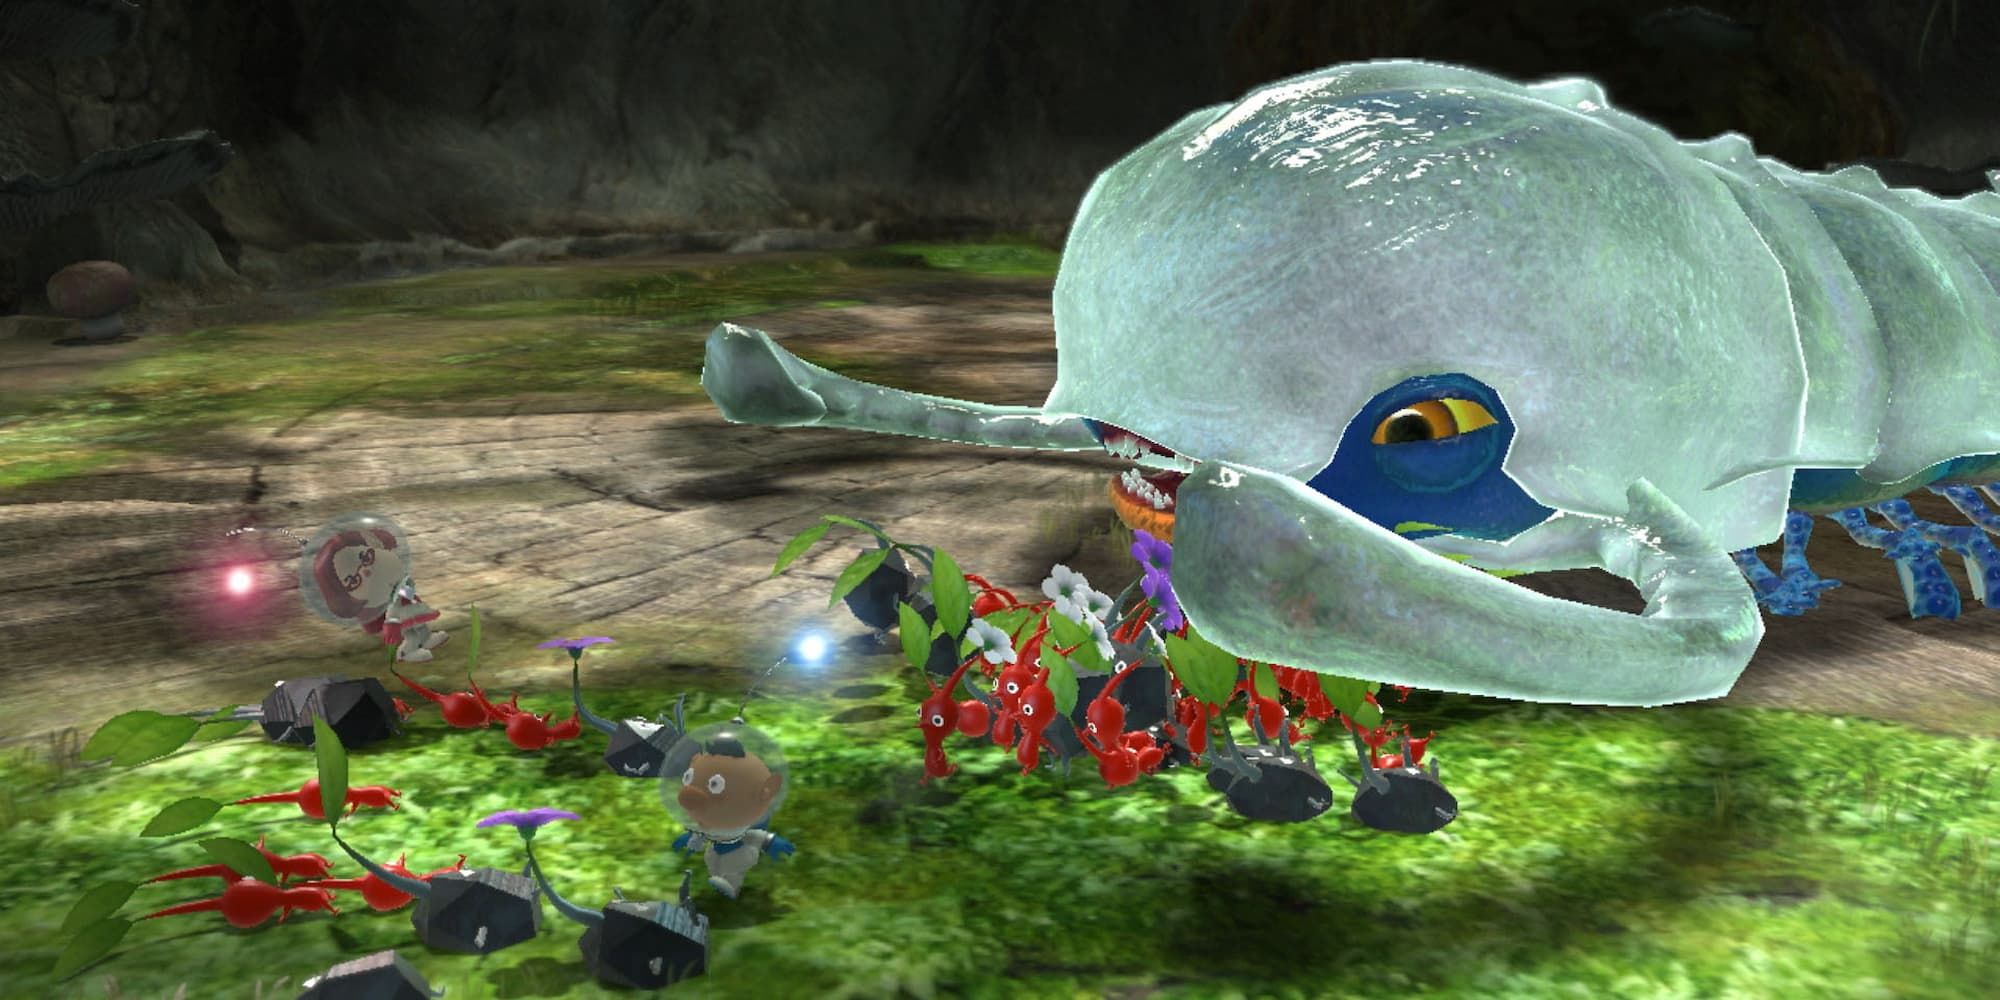 The heroes direct their Pikmin to attack a giant monster that resembles a shrimp in Pikmin 3 Deluxe.